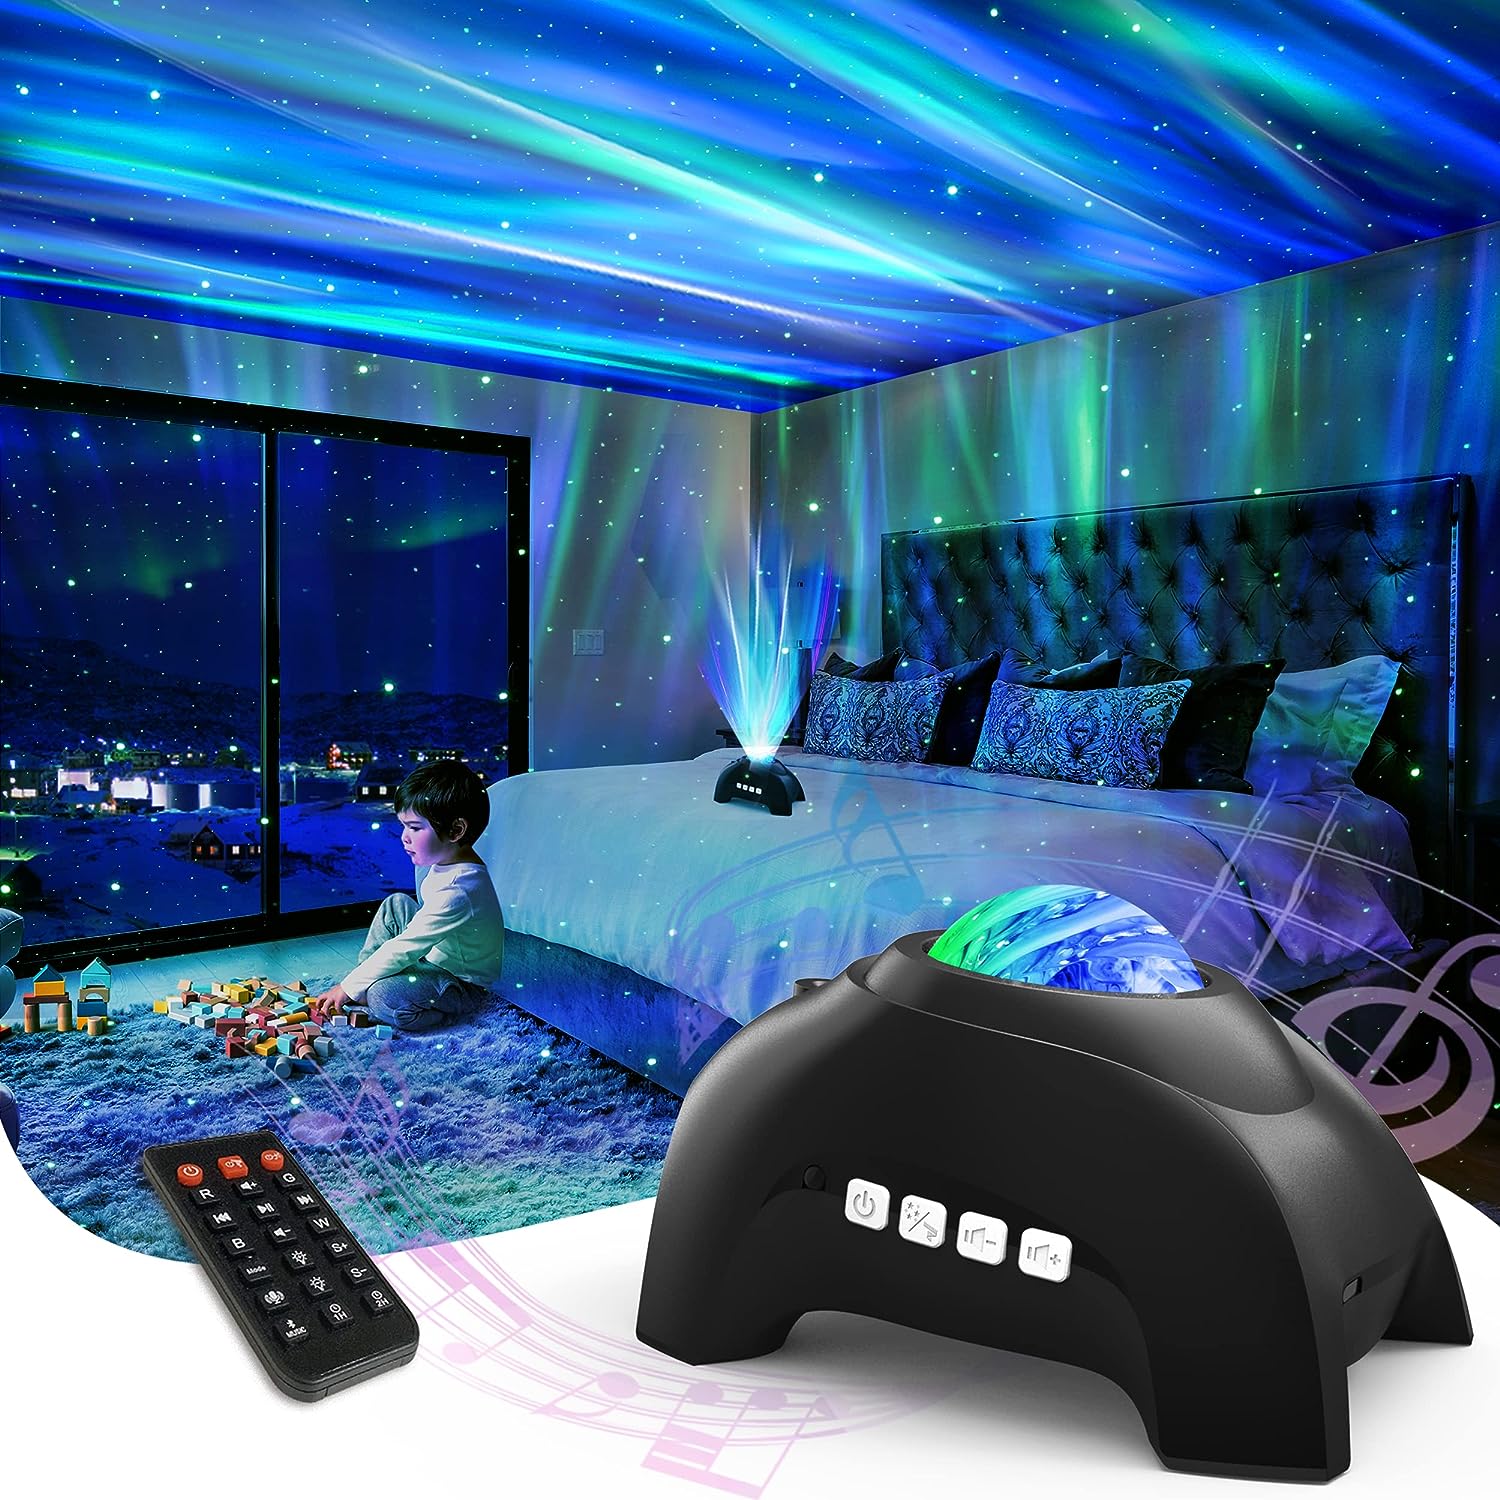 Northern Lights Aurora Projector, Night Light Galaxy Projector for Kids Adults, for Home Decor Bedroom/Ceiling/Party